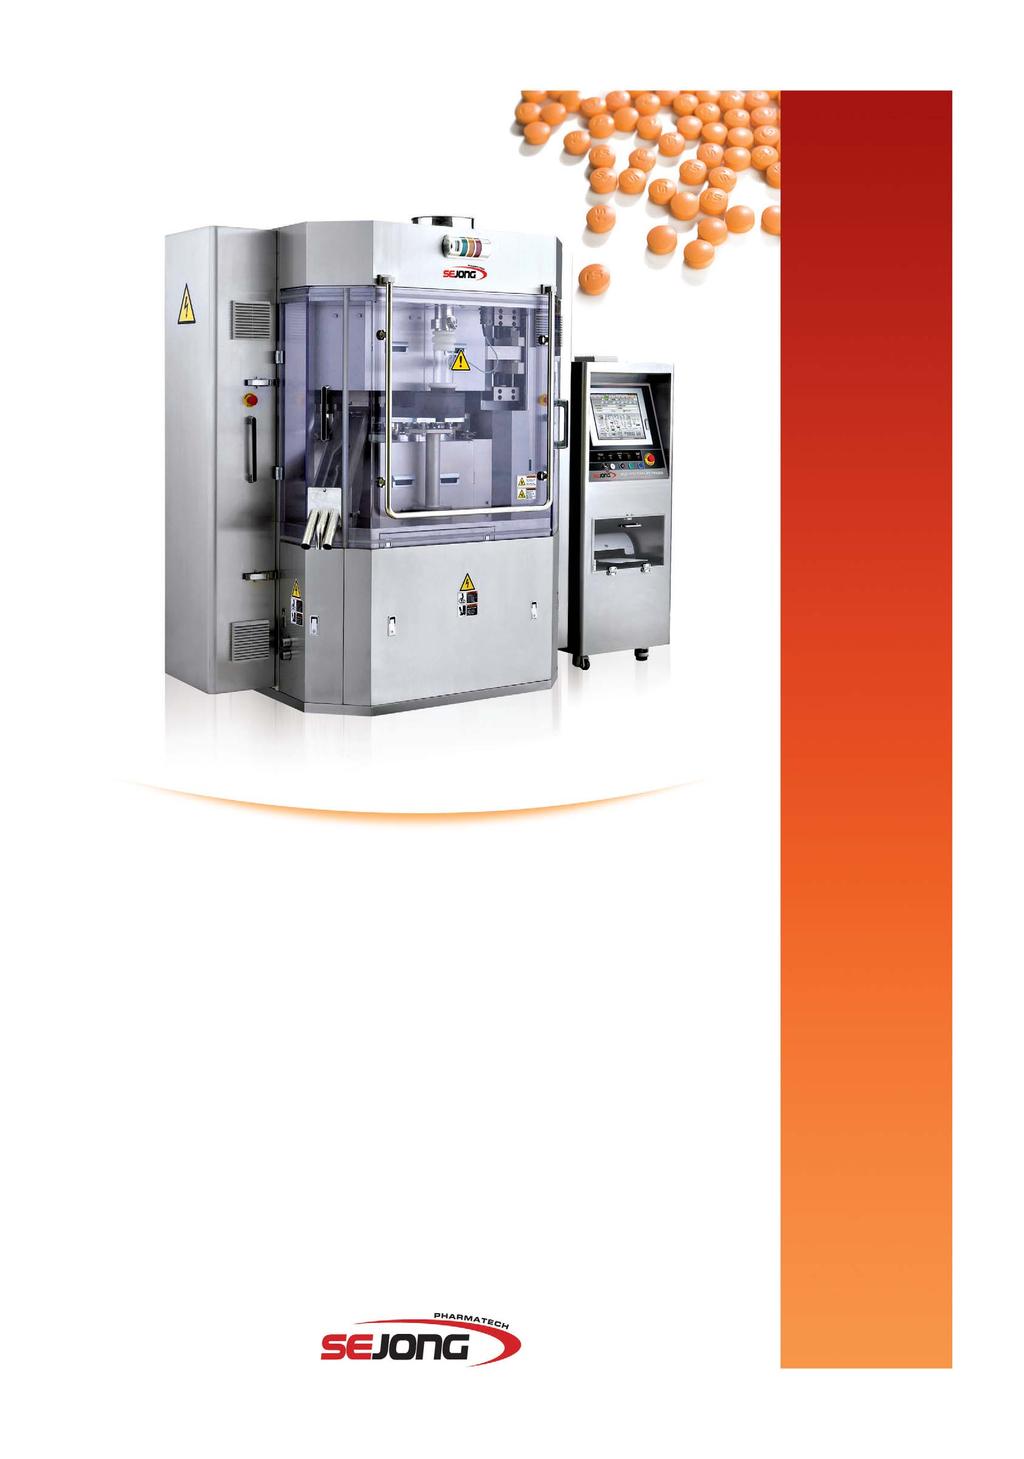 MRC-D Series One of the key features of MRC-D series lies in the fact that it can produce double-layer tablets and in case of the production of single-layer tablets, it is possible to increase